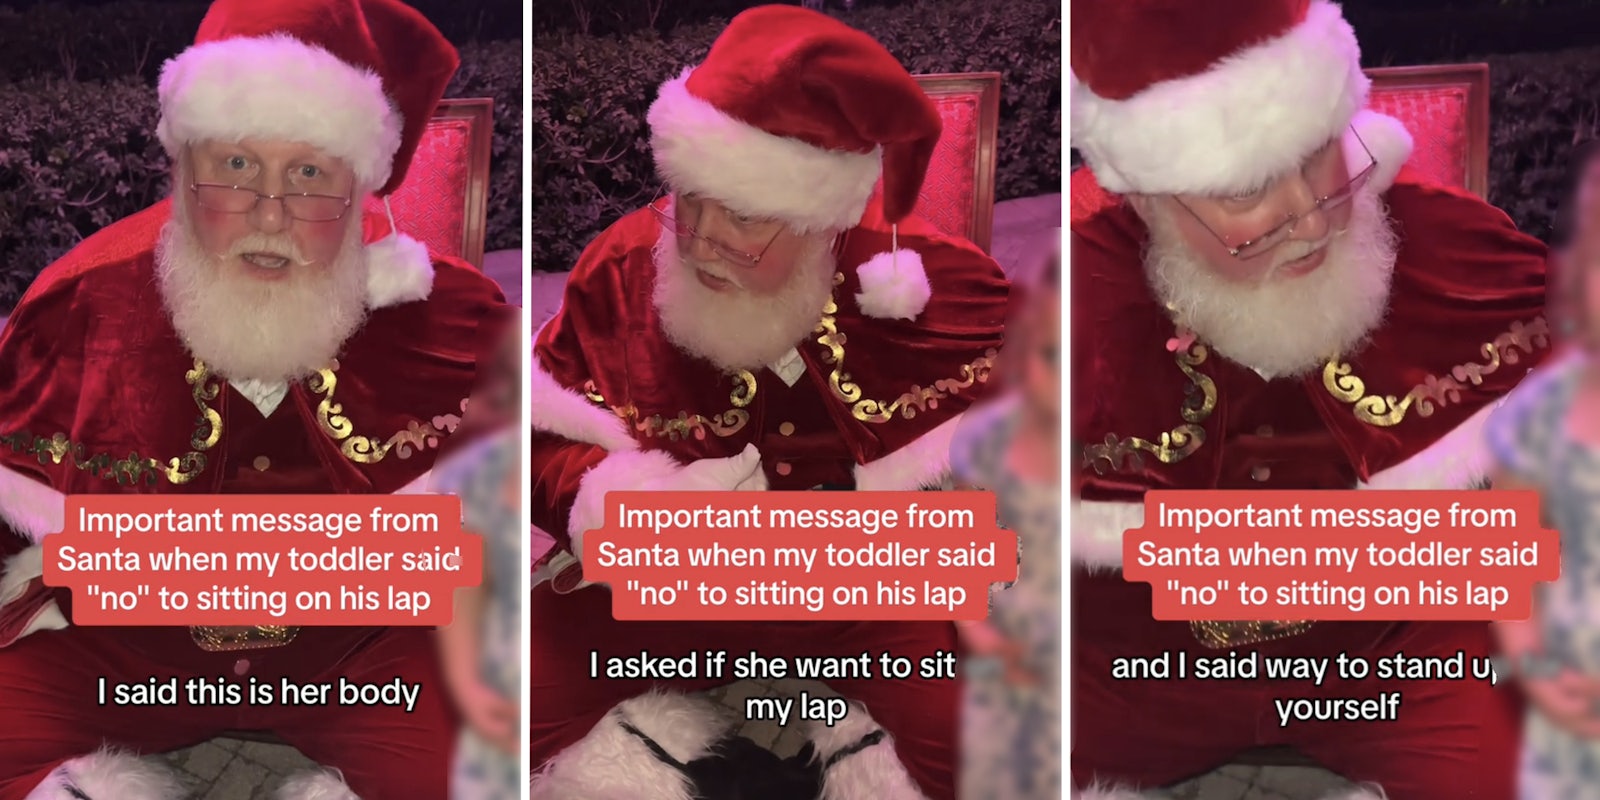 Santa actor gives little girl a lesson on body autonomy